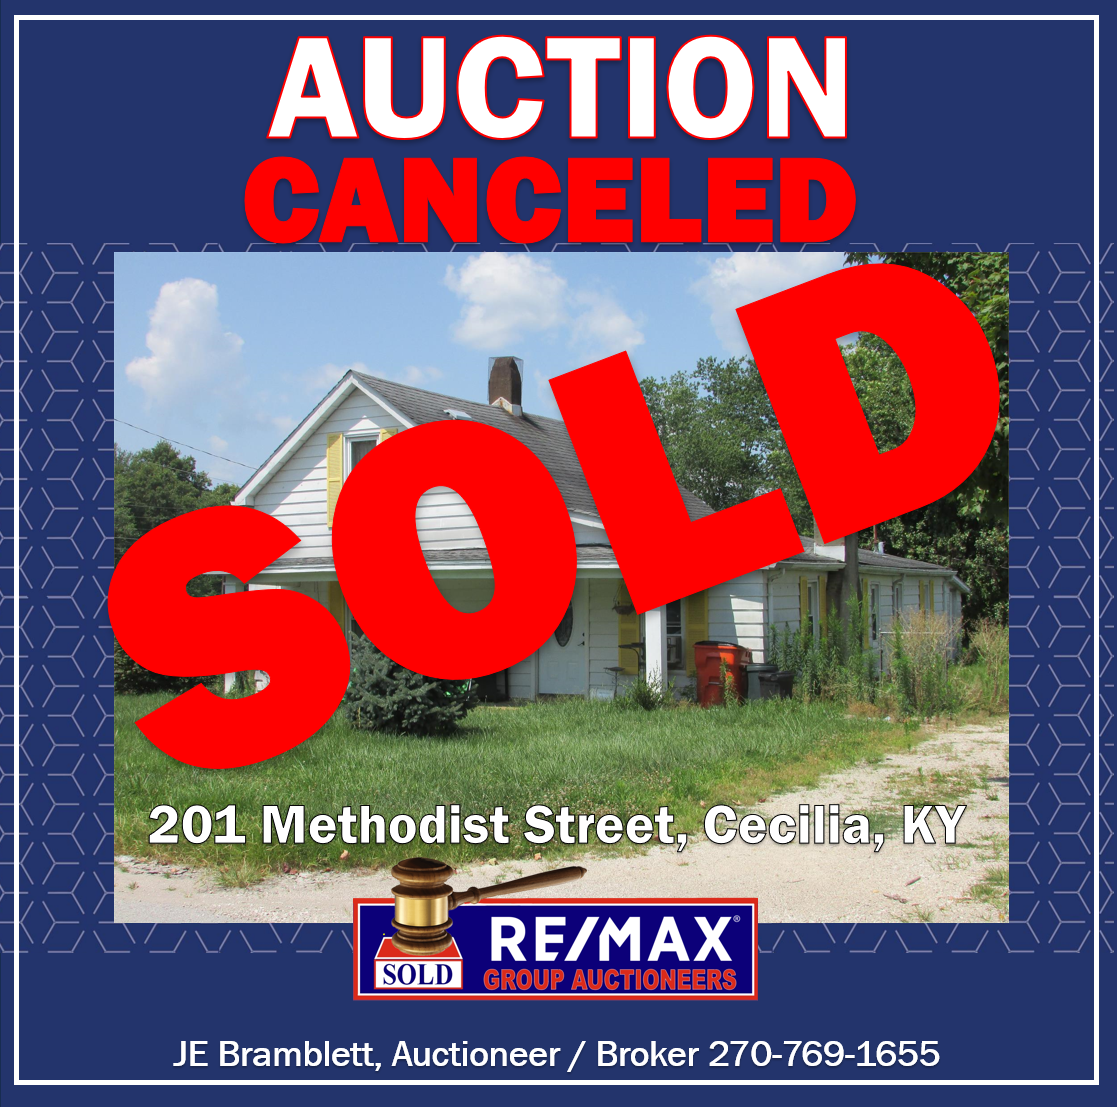 Auction CANCELLED | Home in Downtown Cecilia | Sunday, December 17th @ 2:00 pm EDT